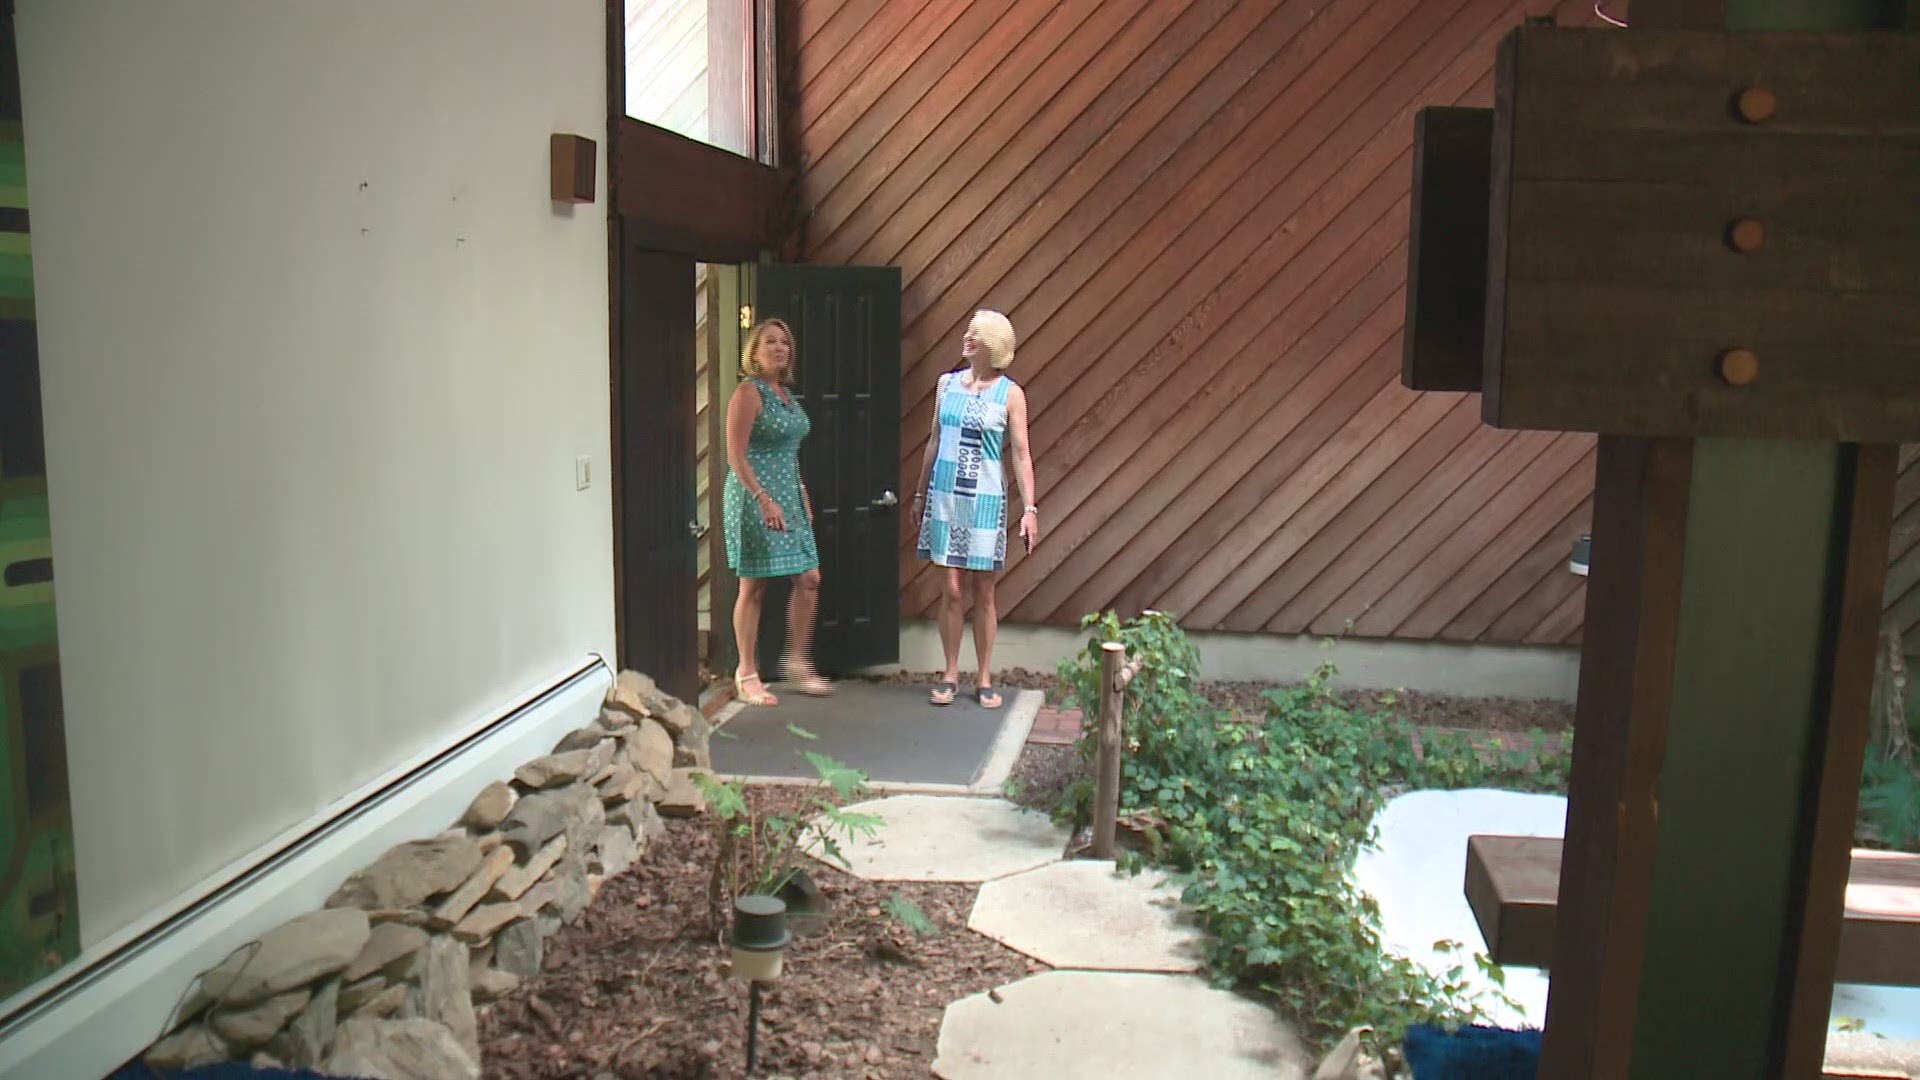 Watch the year-long renovation of a mid-century modern home in Cape Elizabeth.